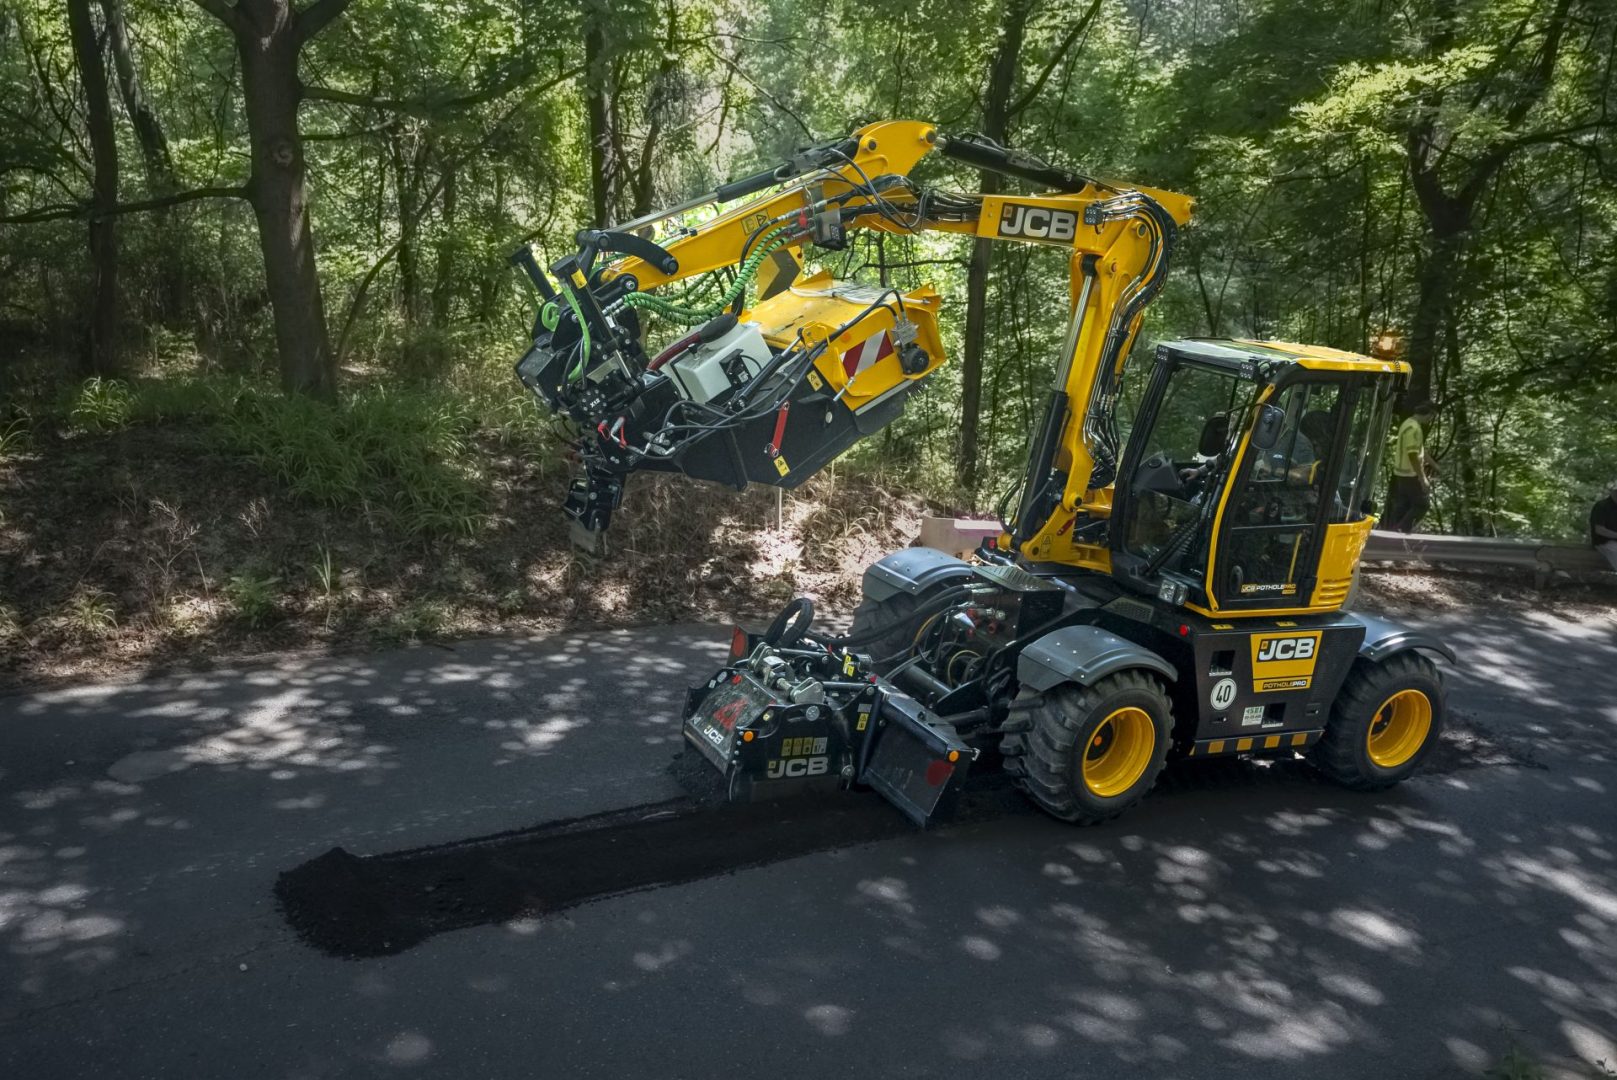 The JCB pothole pro completes a road repair in a treed area